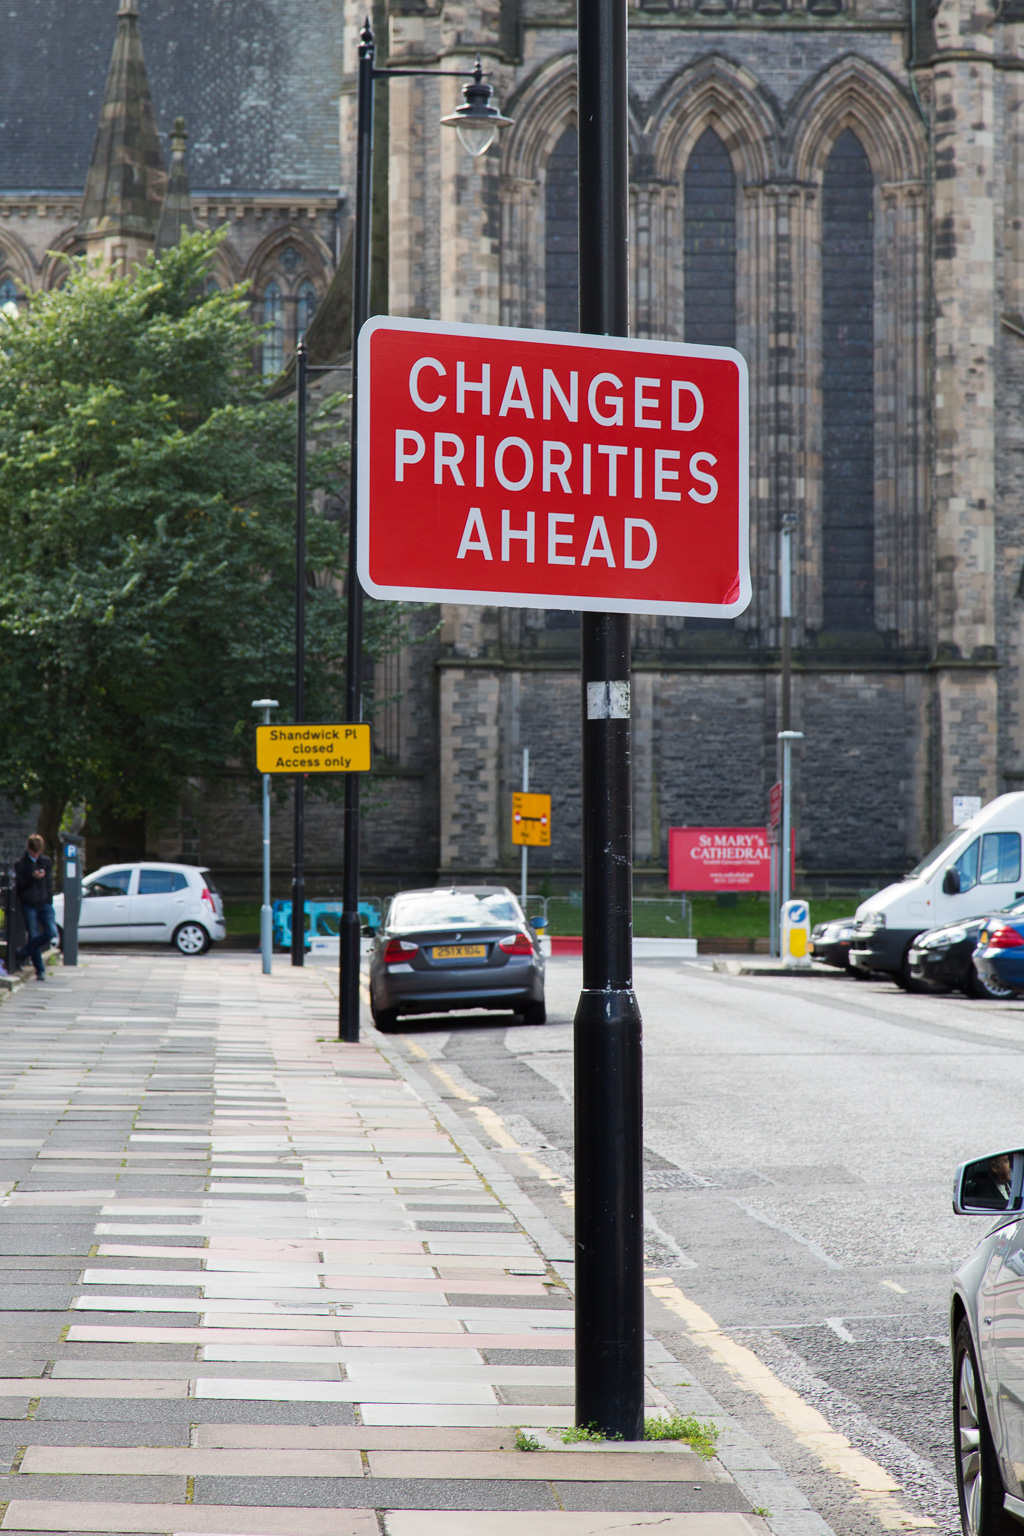 "Changed Priorities Ahead" sign in front of St. Mary's Cathedral, Edinburgh